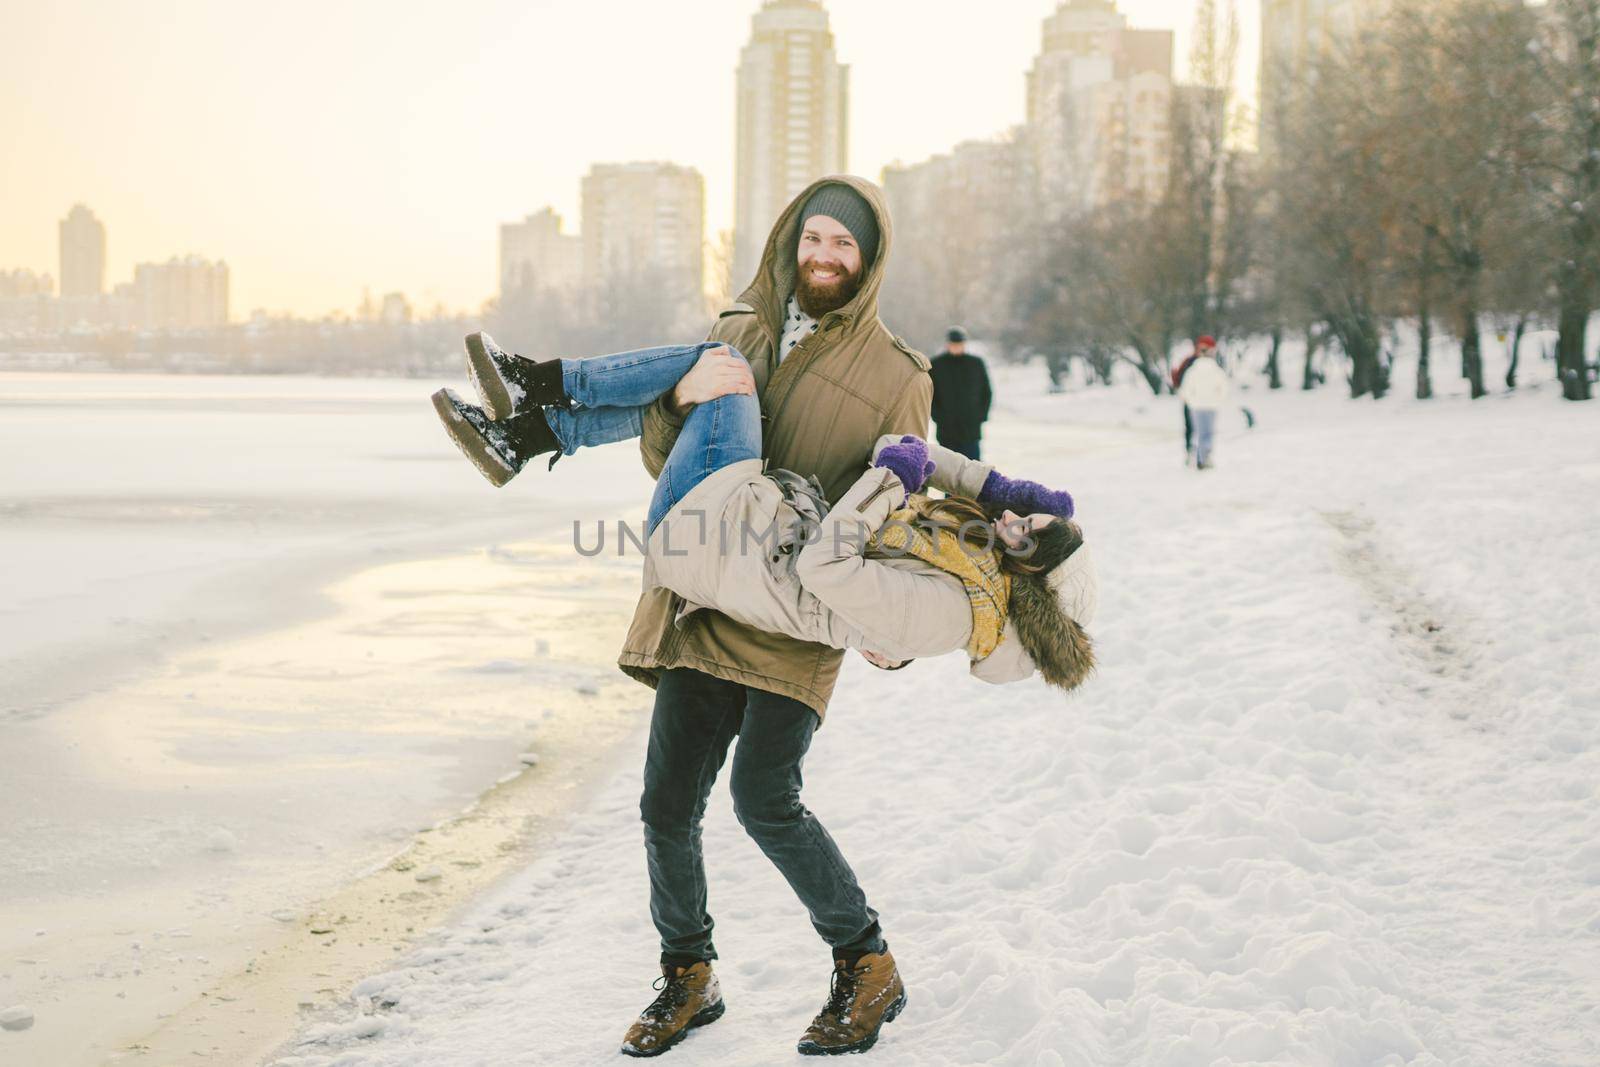 Theme outdoor activities in winter. Loving couple man and woman Caucasian joy happiness happiness love emotions on the shore of the lake. The guy wears holdings a girl. Valentine's day holiday